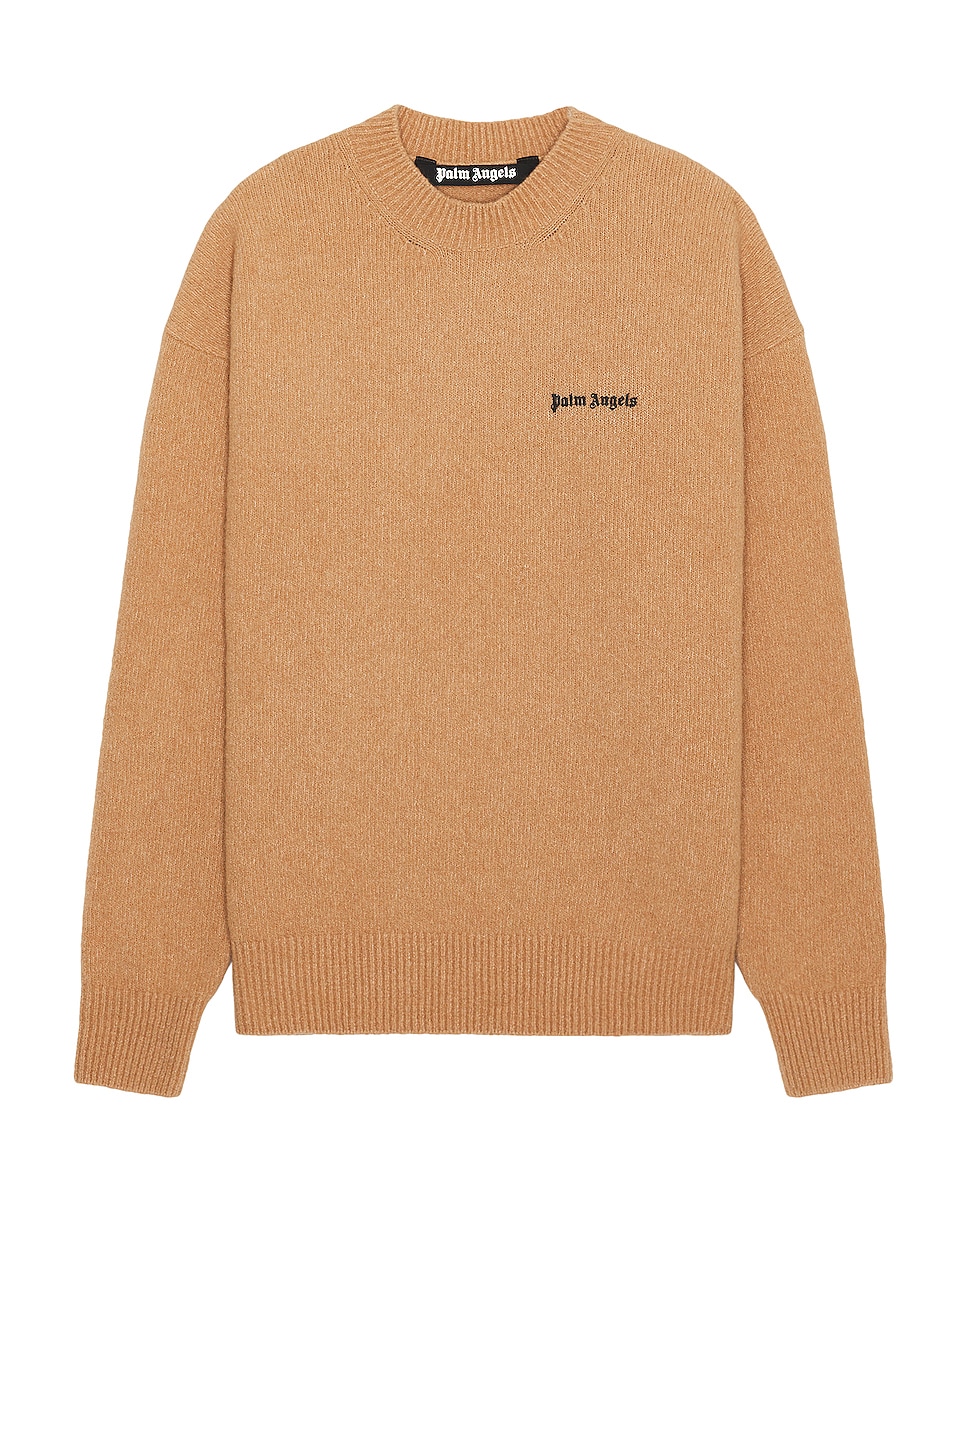 Image 1 of Palm Angels Basic Logo Sweater in Camel